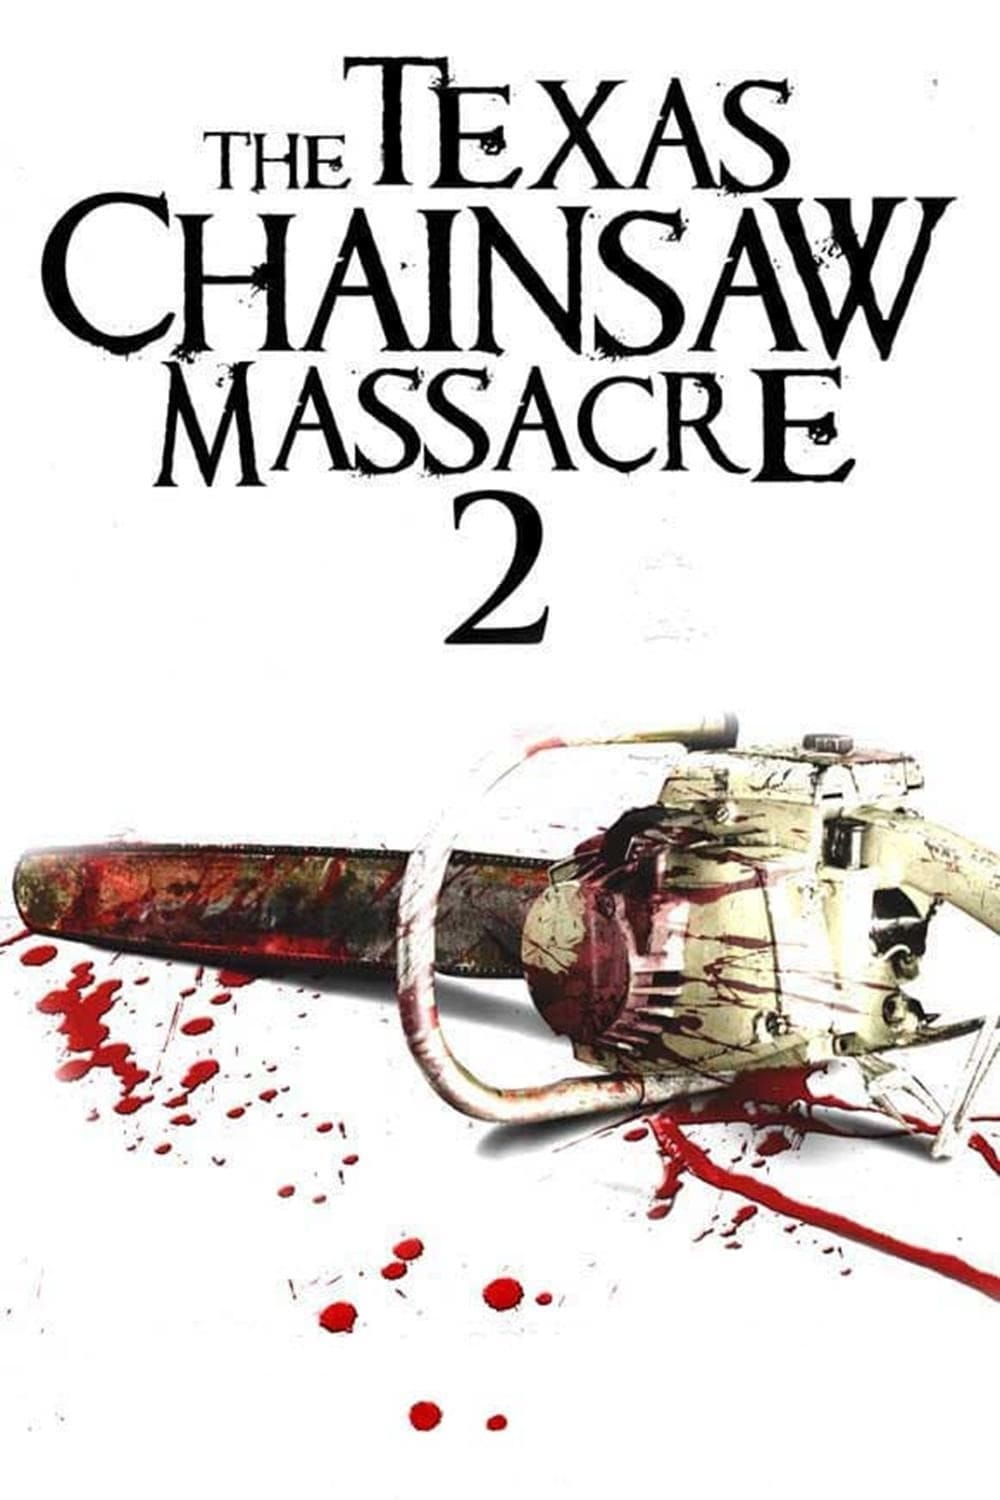 The Texas Chainsaw Massacre 2 (1986) | Poster